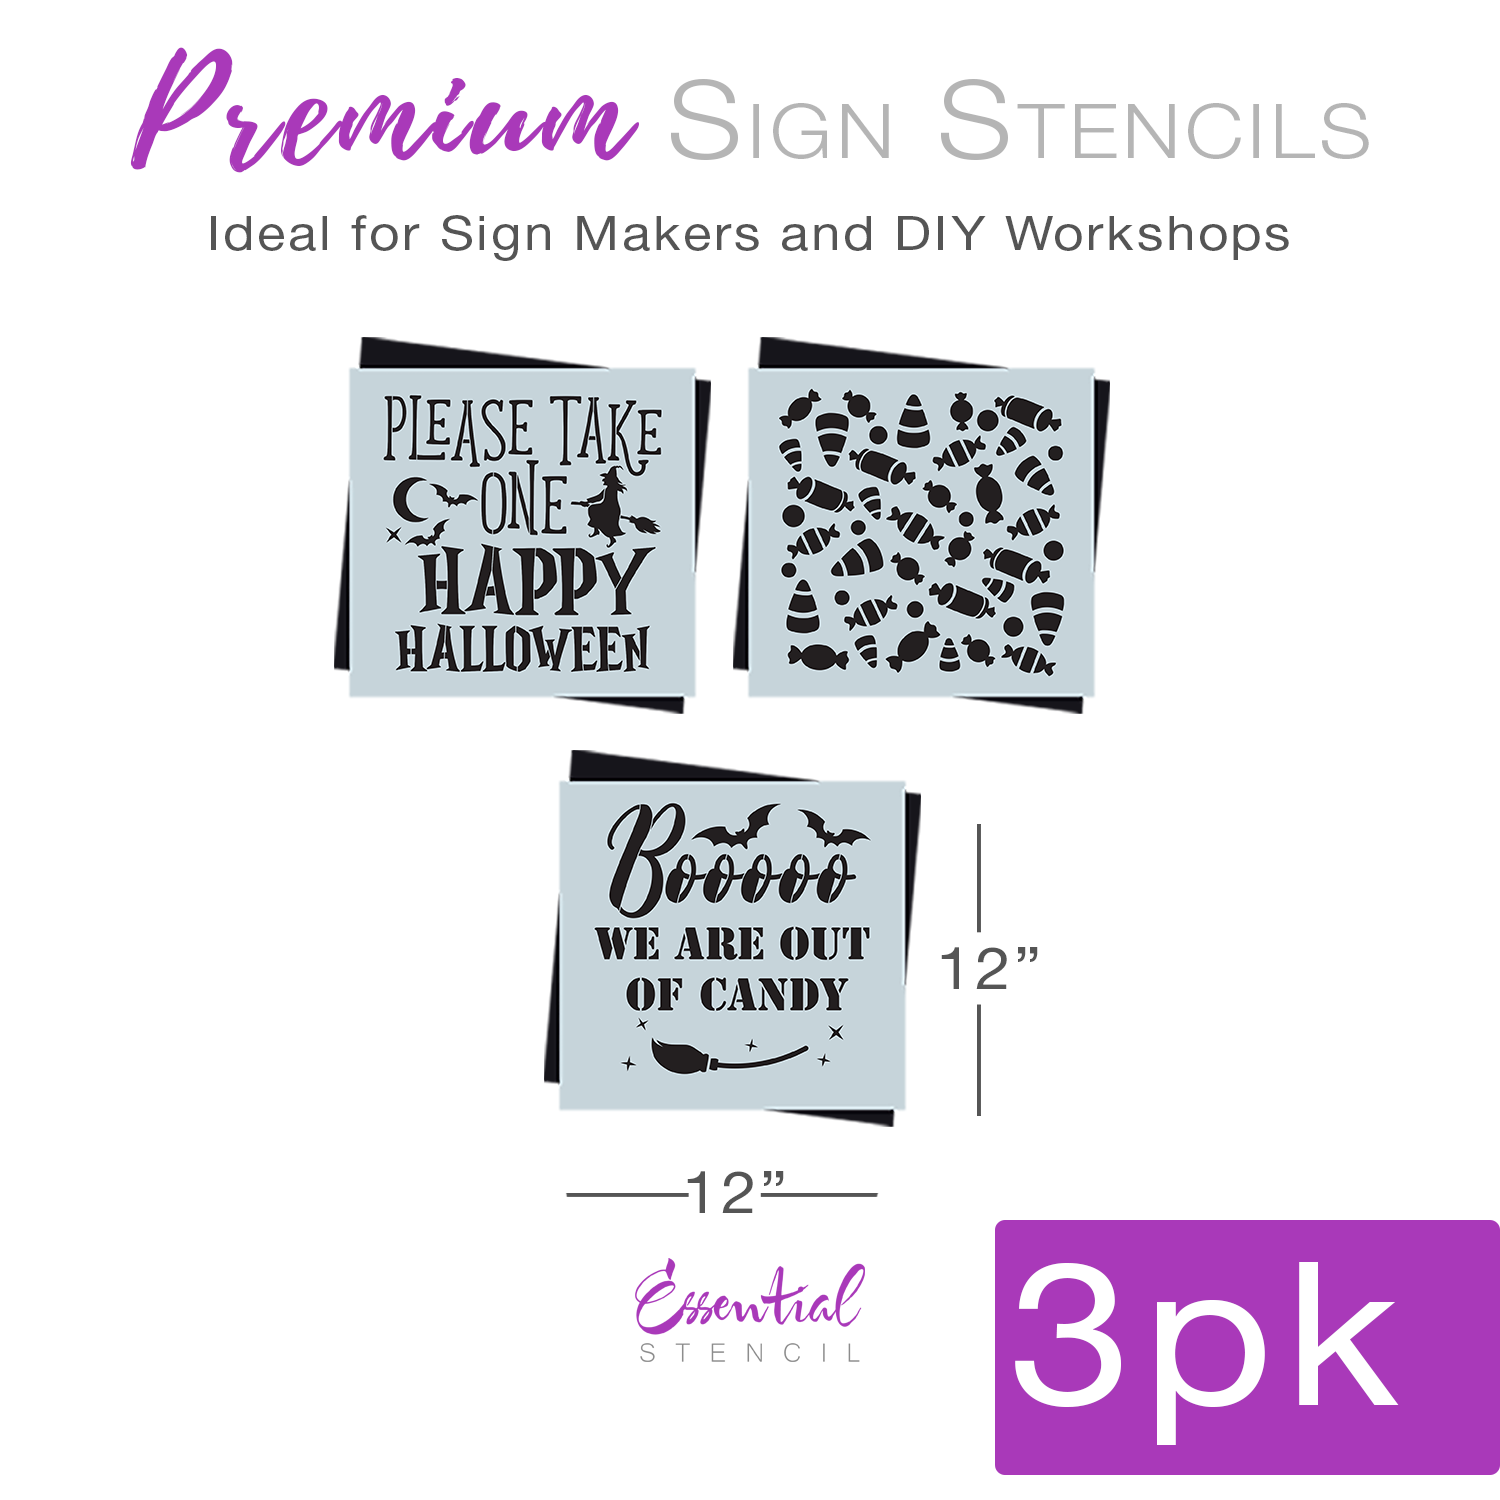 Stencils for Painting on Wood Reusable - 6 Inspirational Word Stencils for  Wood Signs, Canvas and More -Farmhouse Stencil Set Includes Large Stencils